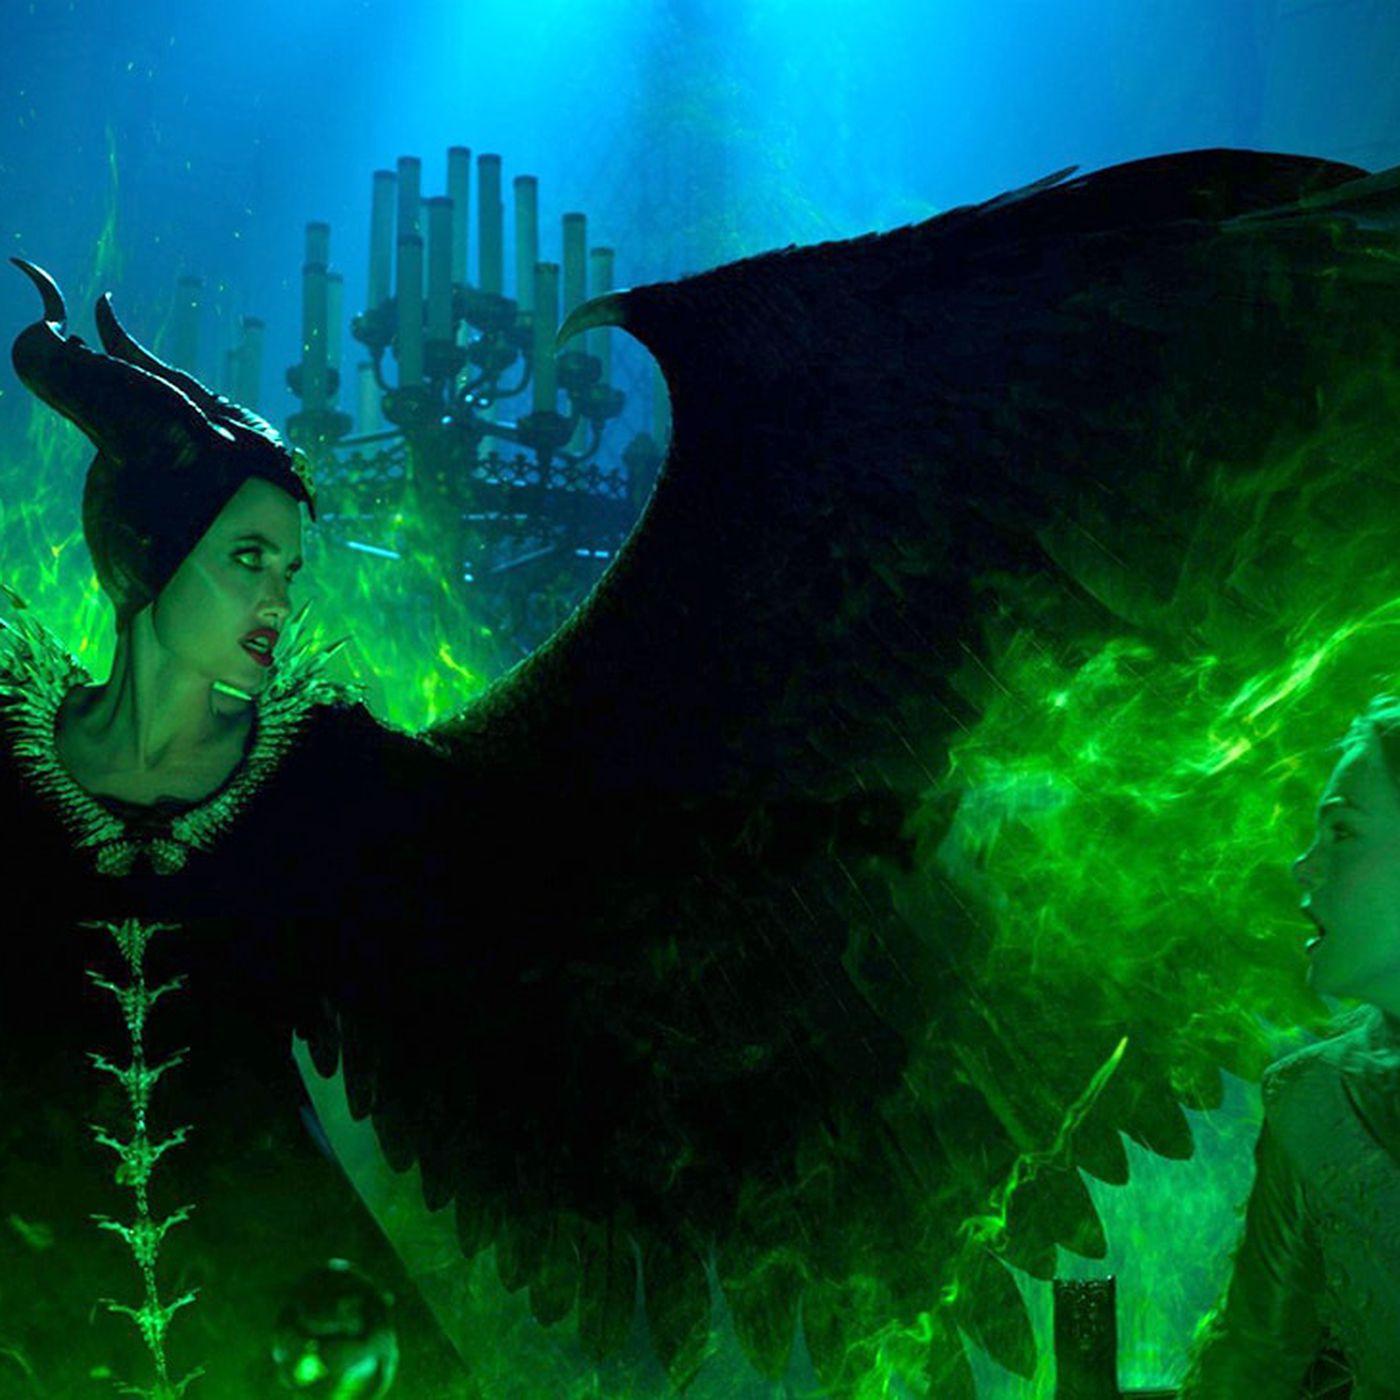 New trailers: Mulan, Maleficent: Mistress of Evil, Another